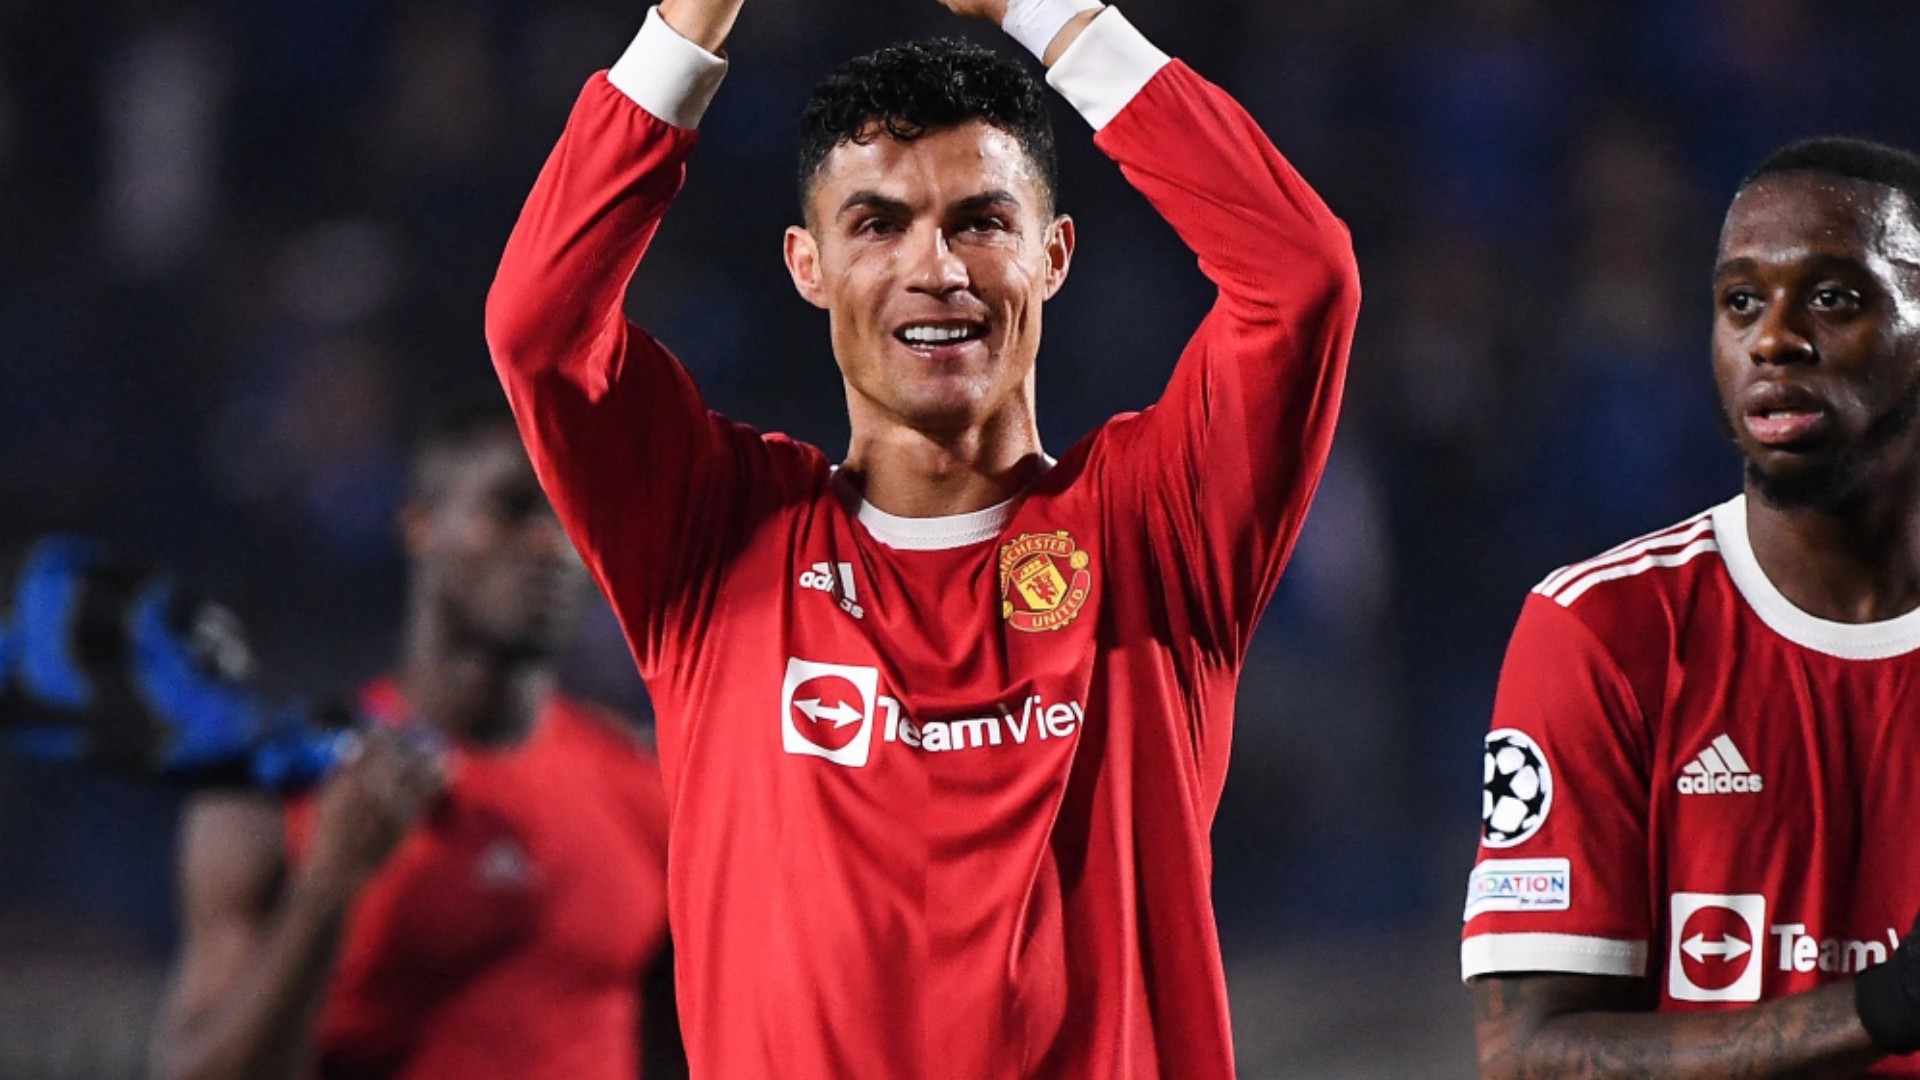 ‘It was a Michael Jordan moment’ – Solskjaer delighted as Ronaldo rescues Manchester United again